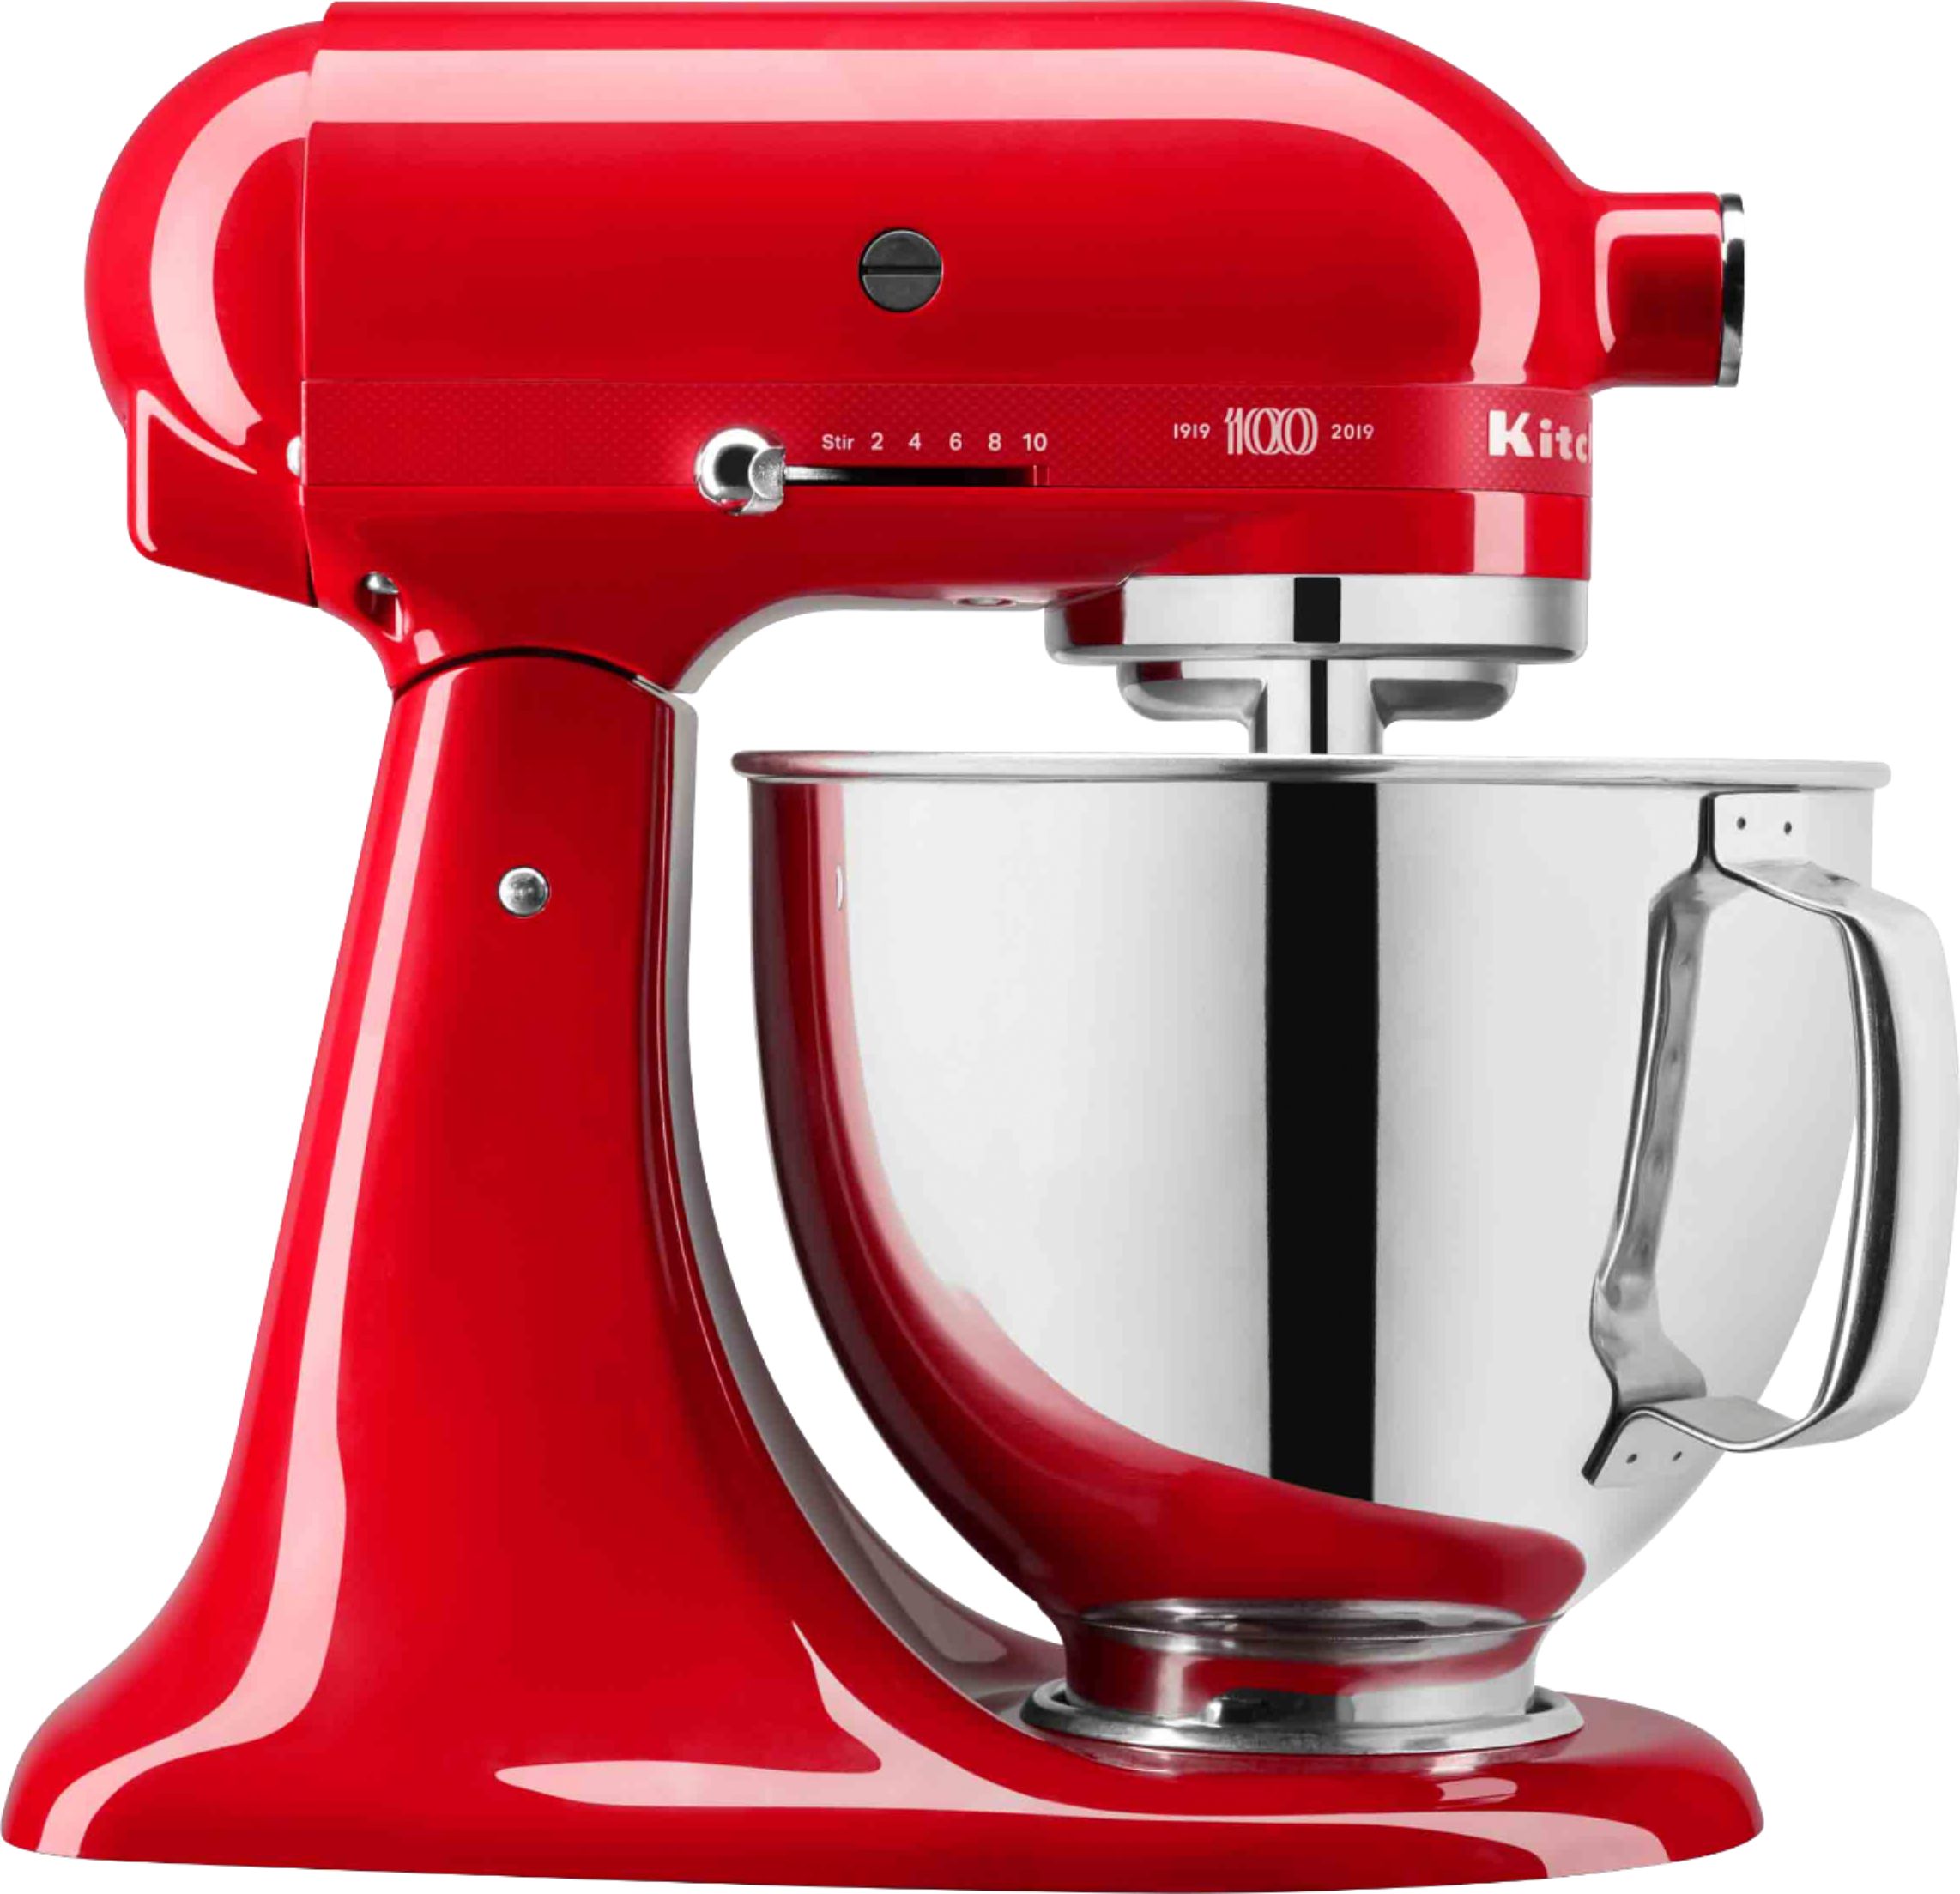 Amway Malaysia - FREE KitchenAid Mixer Cover (Red) and Silicone